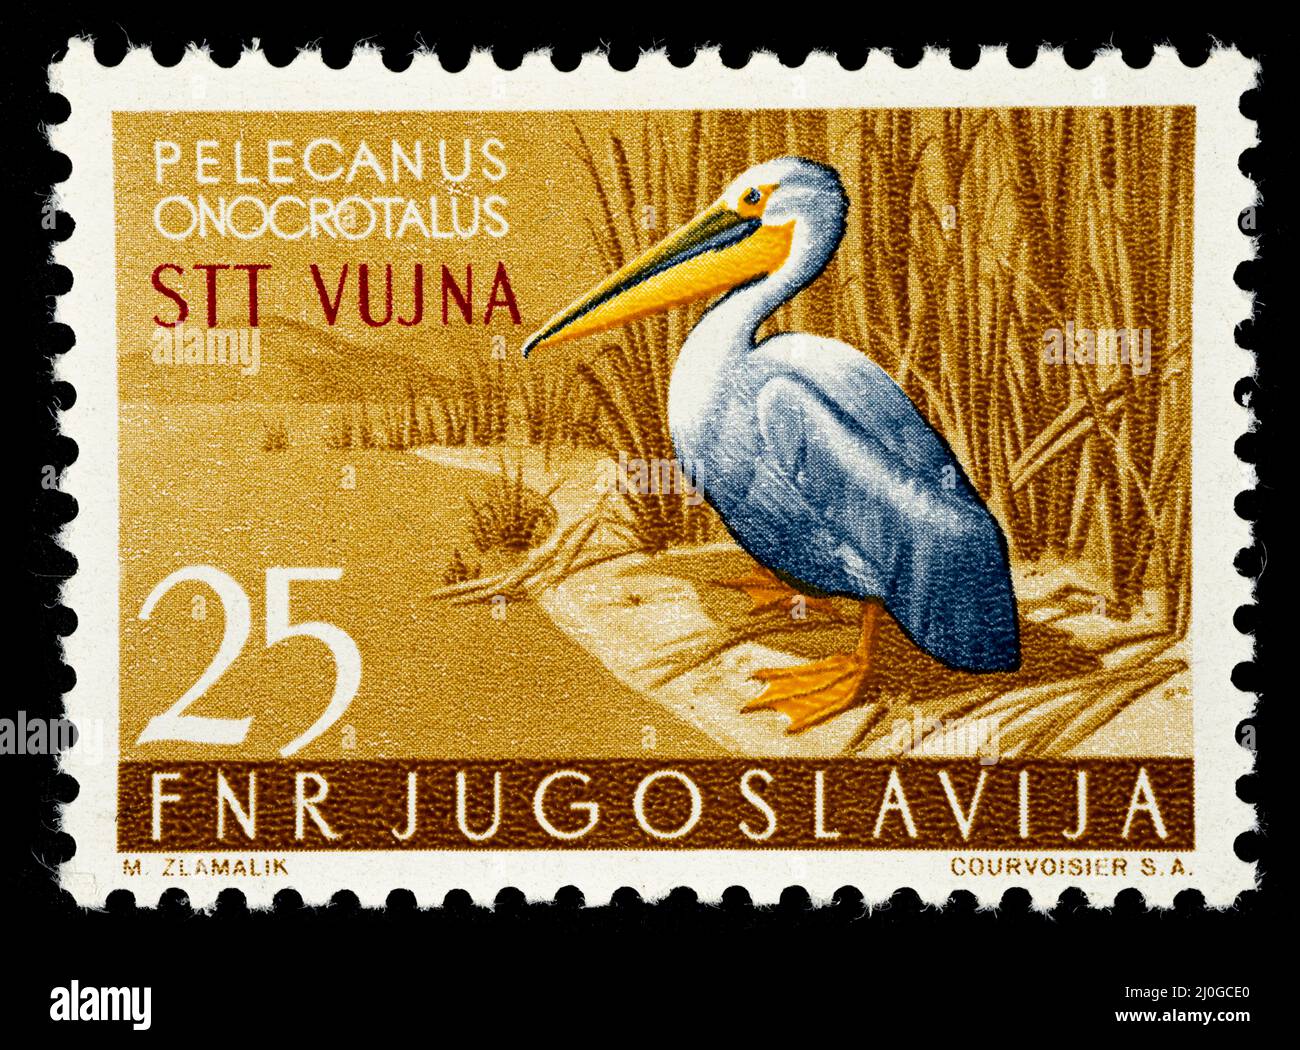 Commemorative postage stamp with the illustration of a pelican - Pelecanus Onocrotalusissued by the  former Yugoslavia overprinted STT VUJNA, free ter Stock Photo